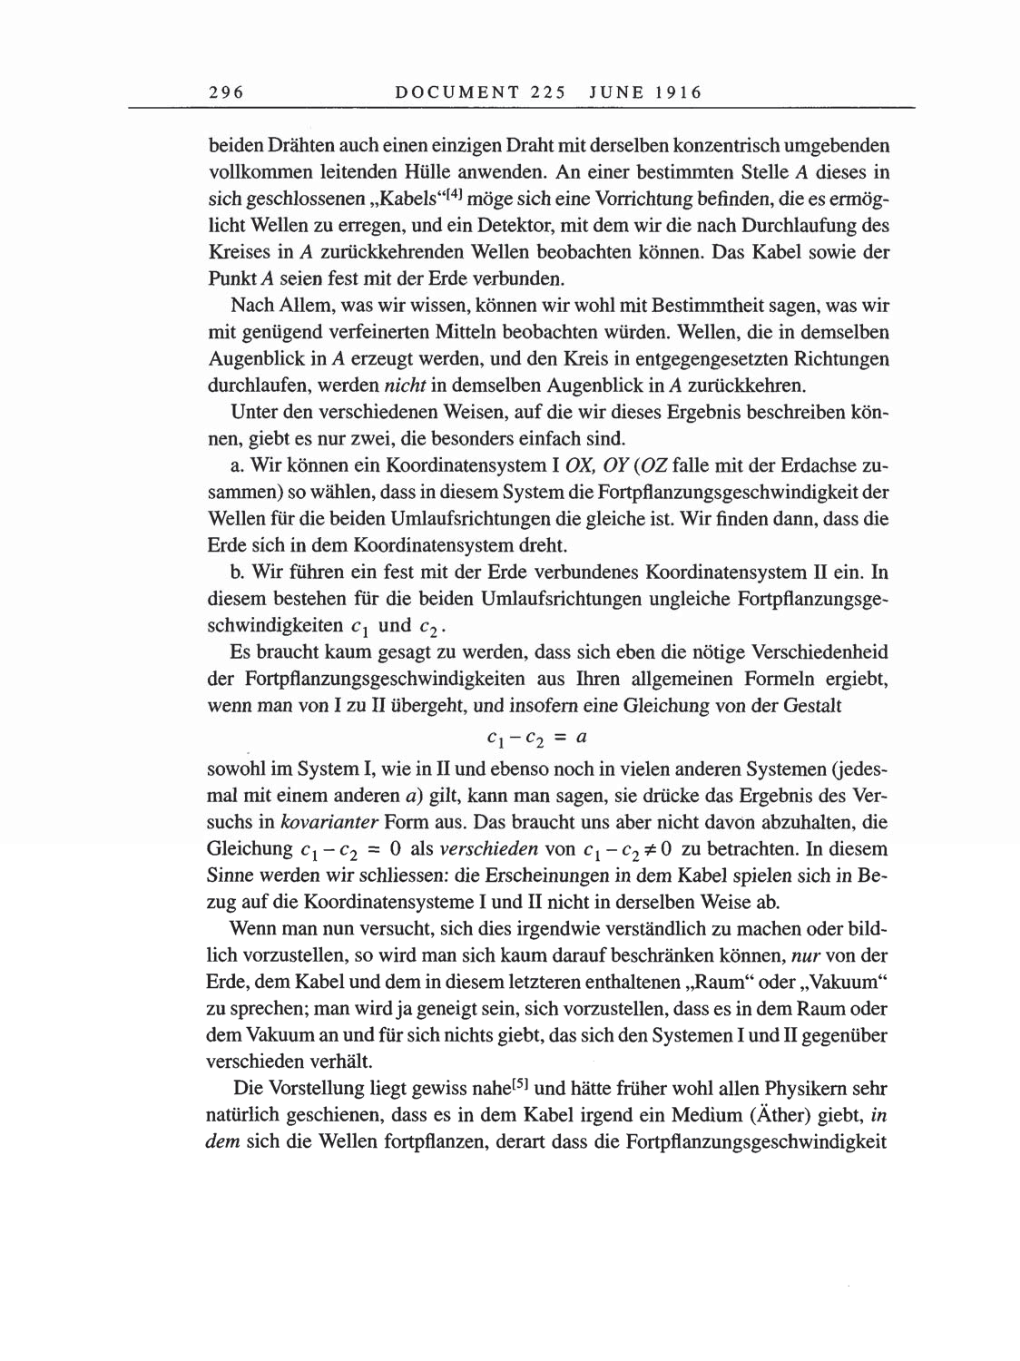 Volume 8, Part A: The Berlin Years: Correspondence 1914-1917 page 296